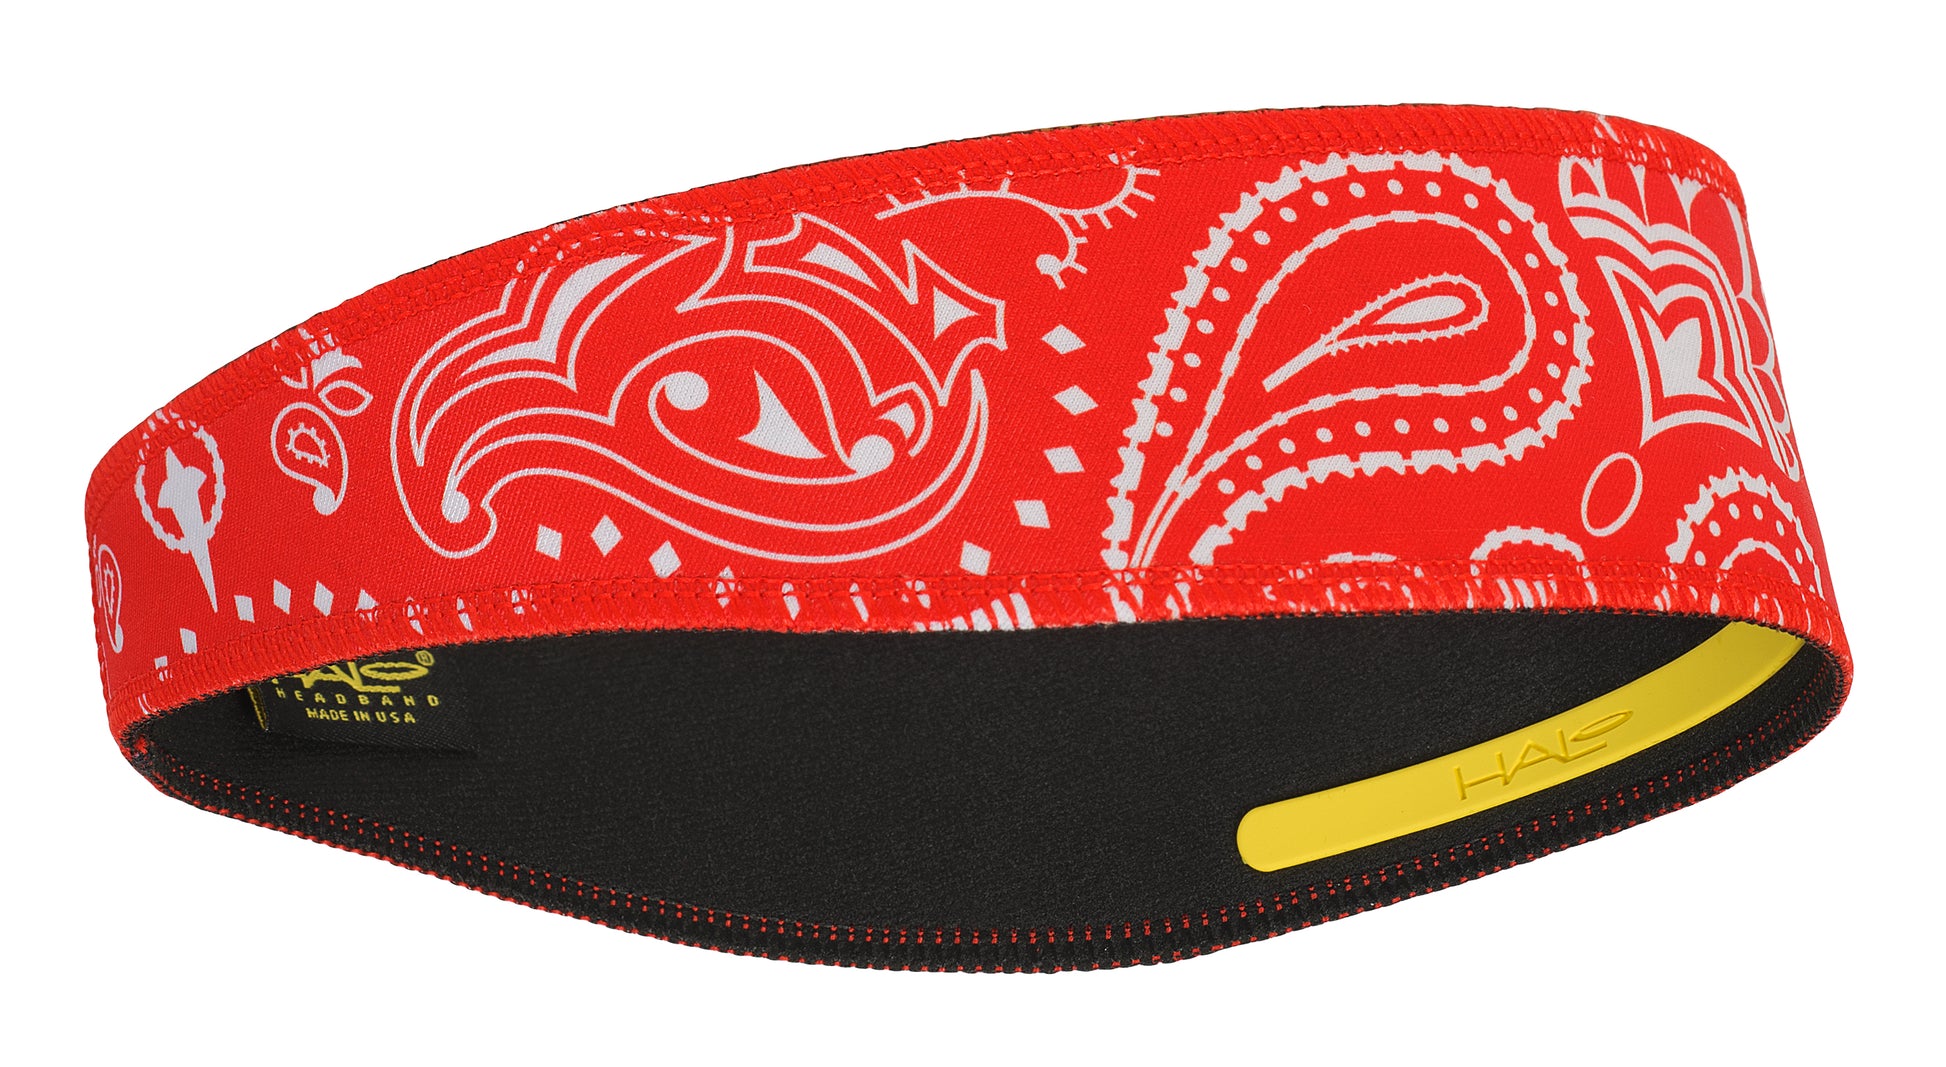 Halo II pull over Head band in paisley red